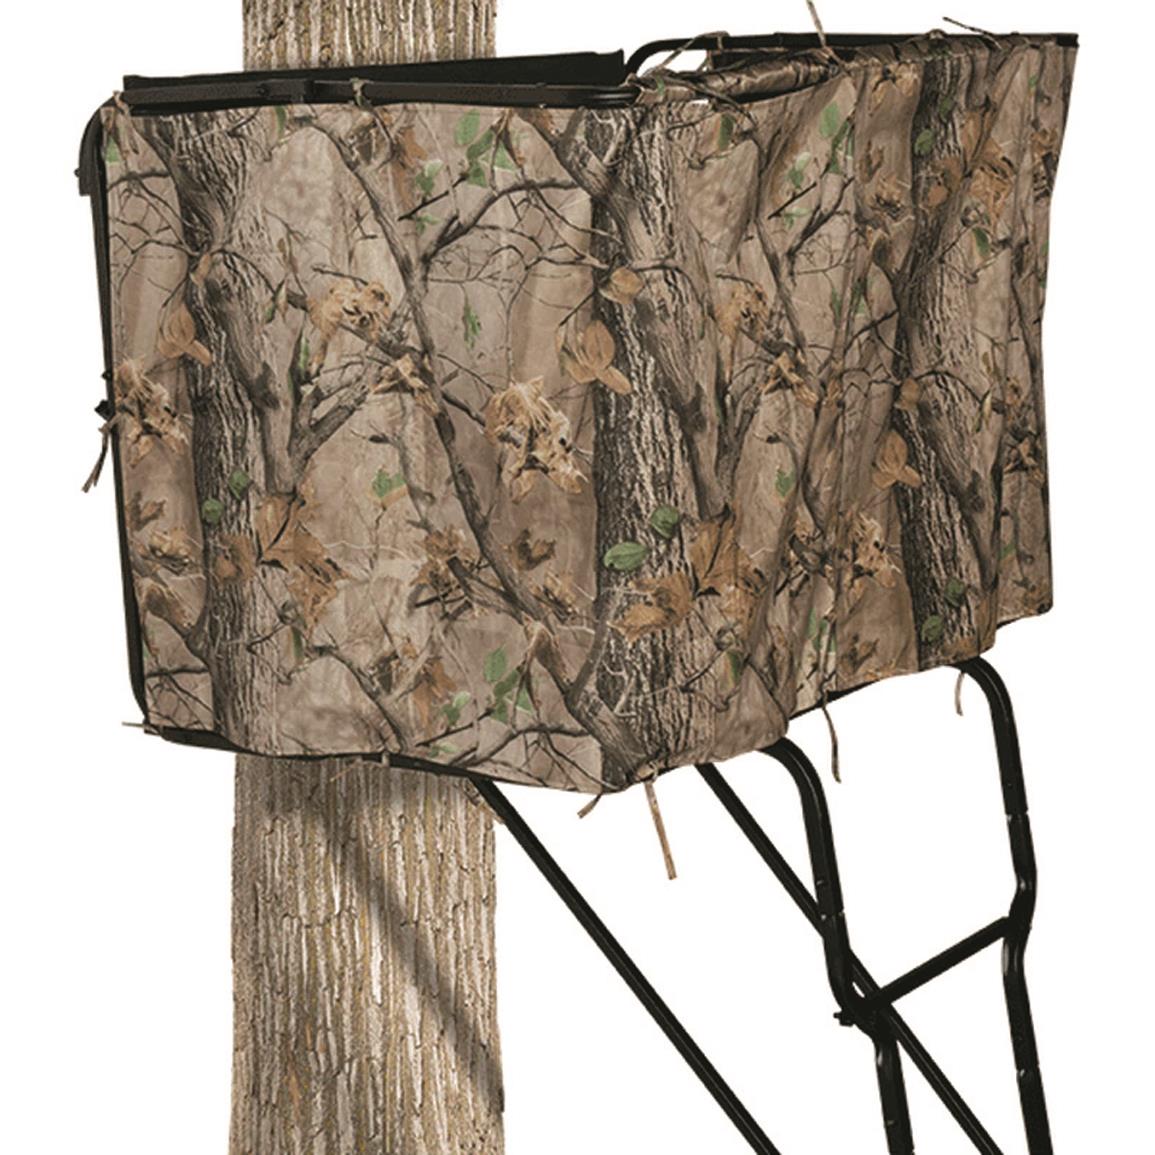 Muddy Deluxe Universal Tree Stand Blind Kit